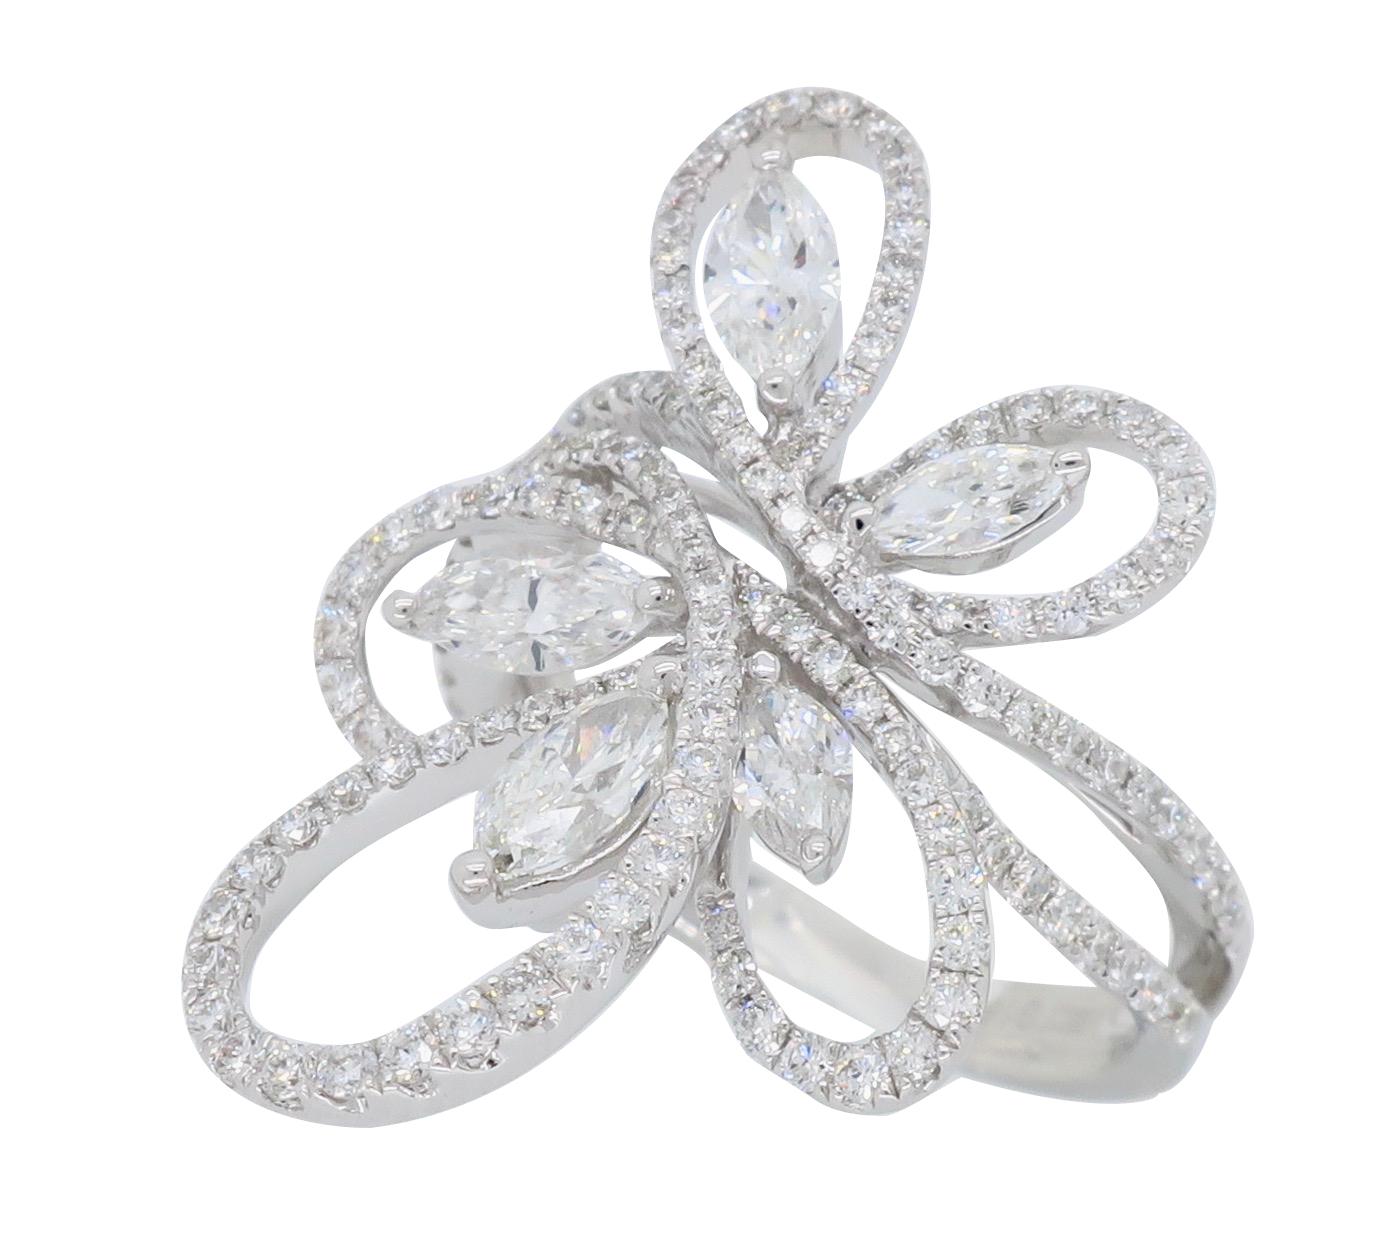 Floral Design Abstract Diamond Fashion Ring 5